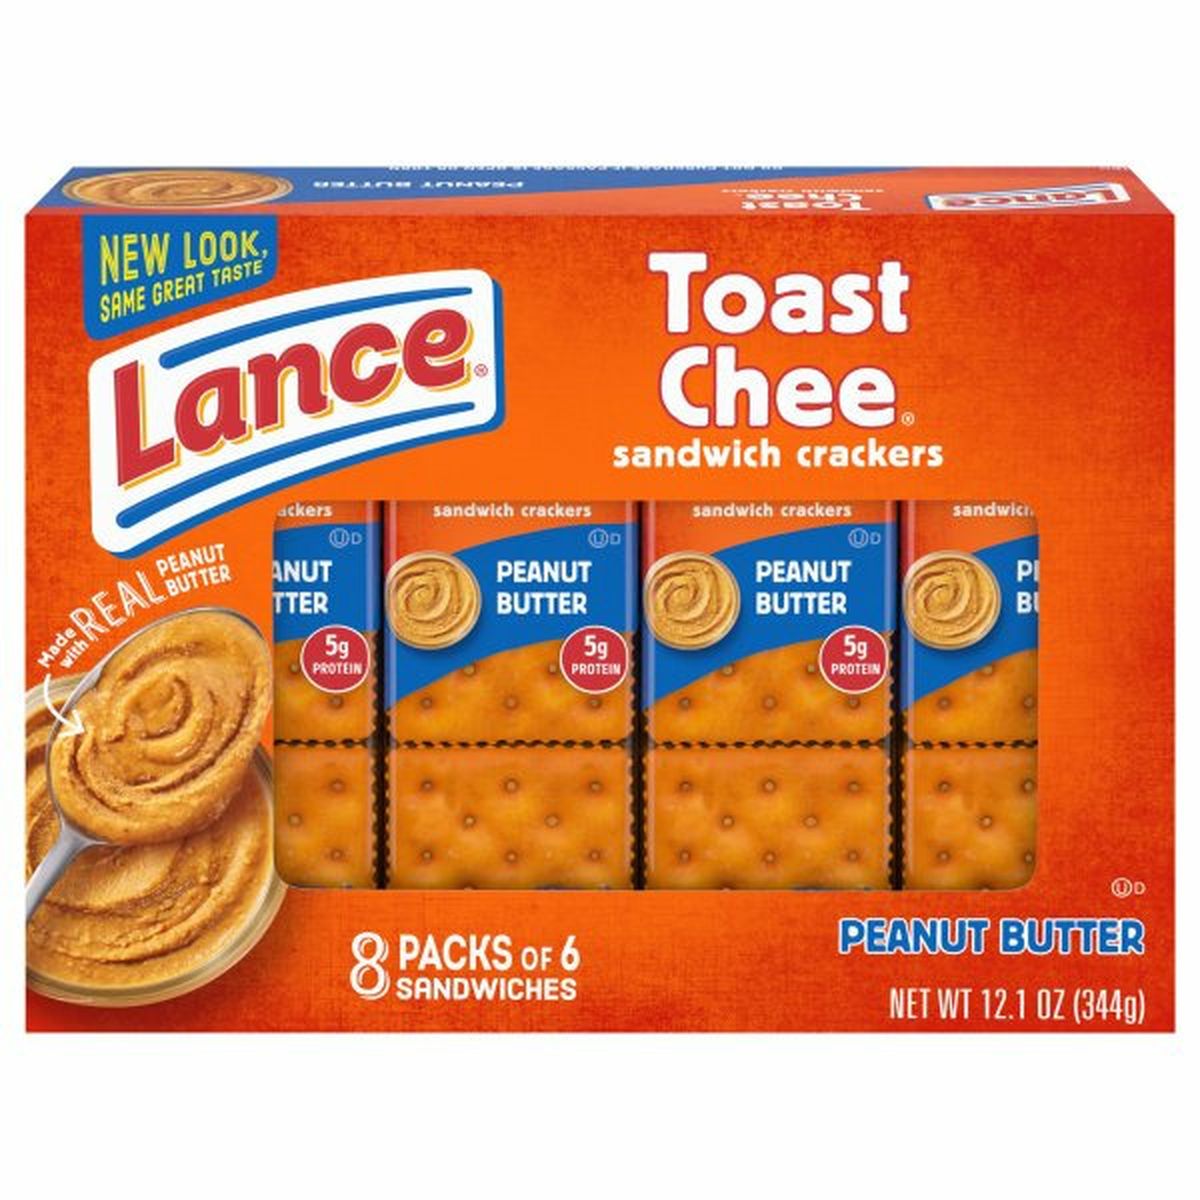 Calories in Lances Toast Chee Sandwich Crackers, Peanut Butter, 8 Packs